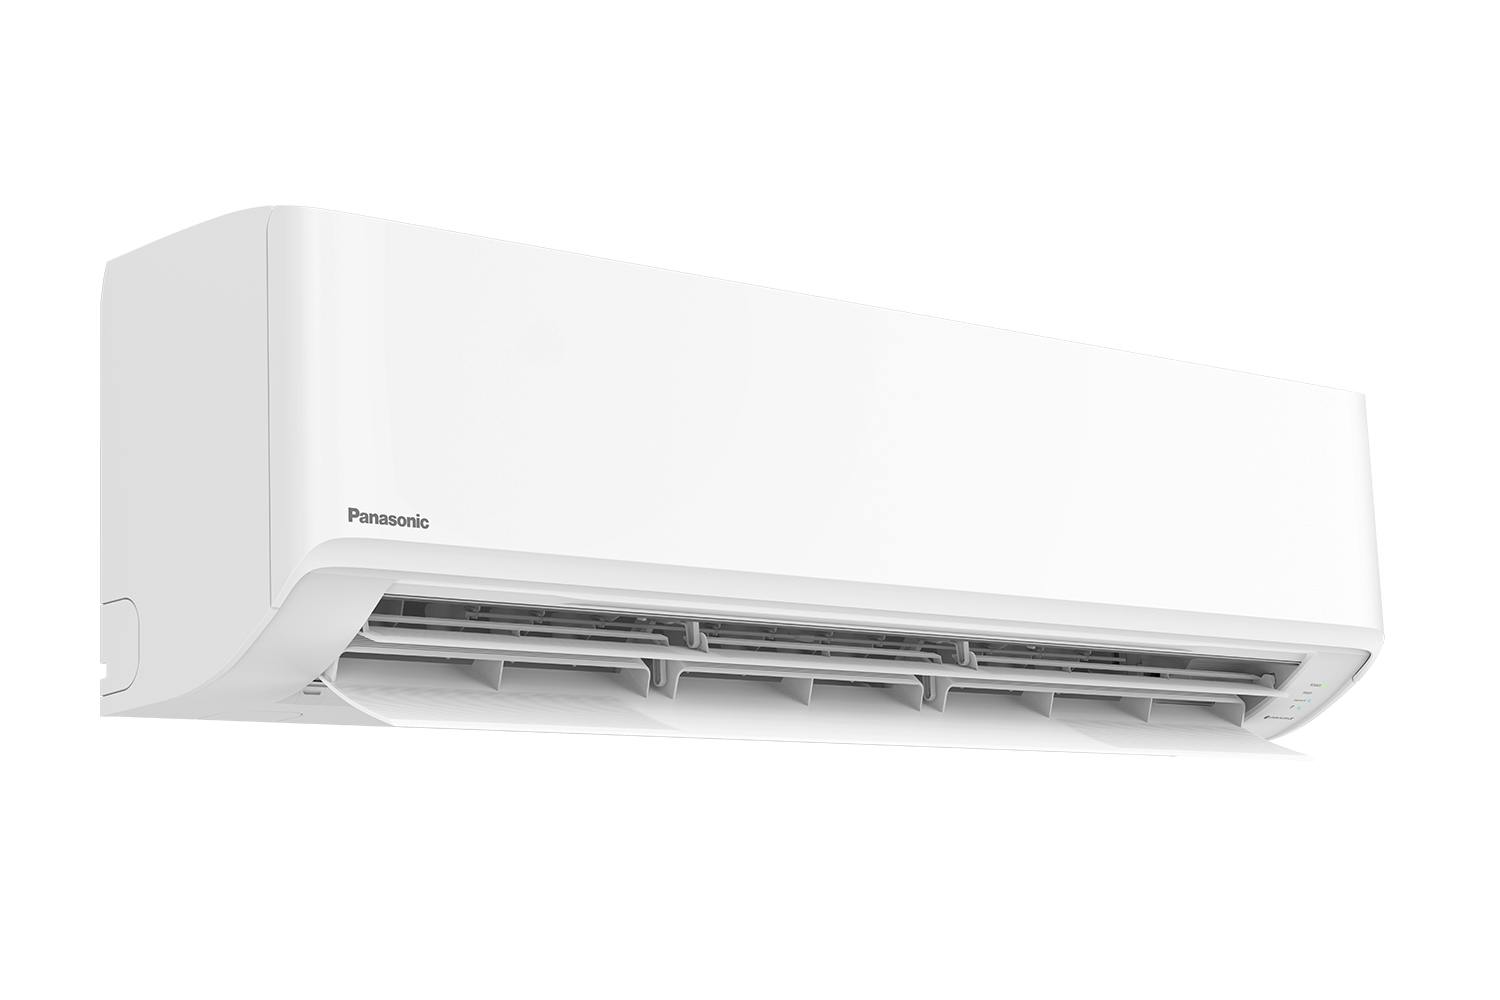 Panasonic Z71 Heat Pump Air Conditioner - 8.0KW Heat/7.1KW Cool - (Indoor and Outdoor Kit/High Wall/Split System)